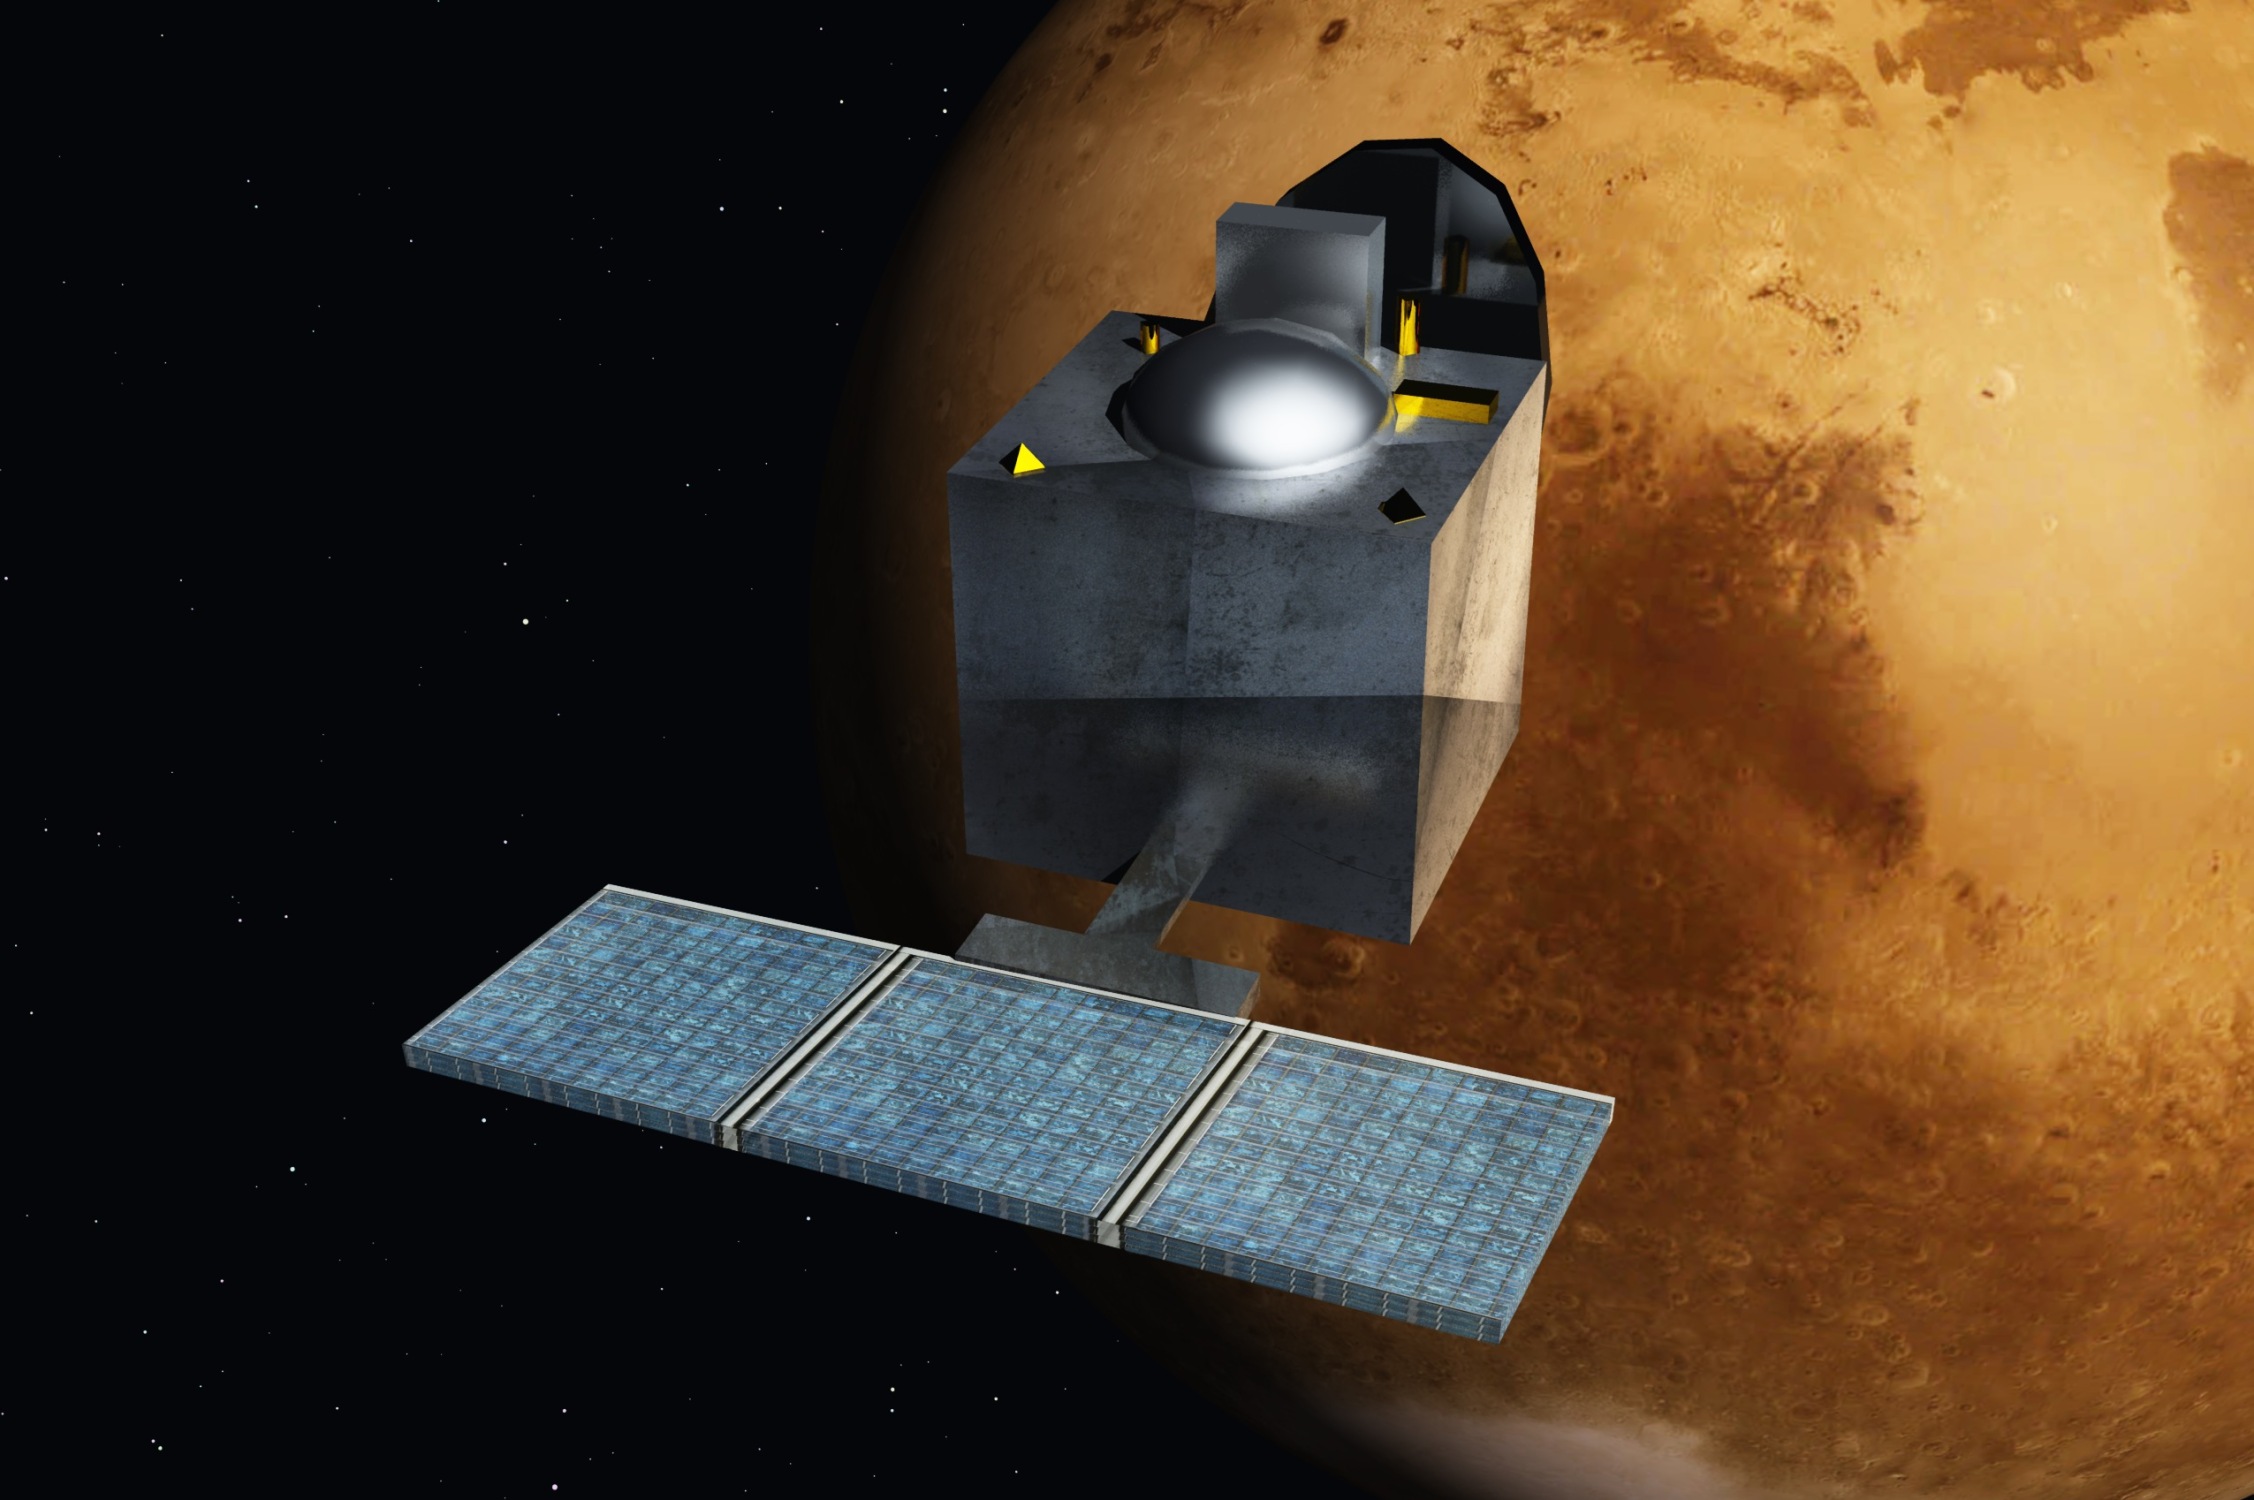 India’s Mars Mission Enter its Final Phase